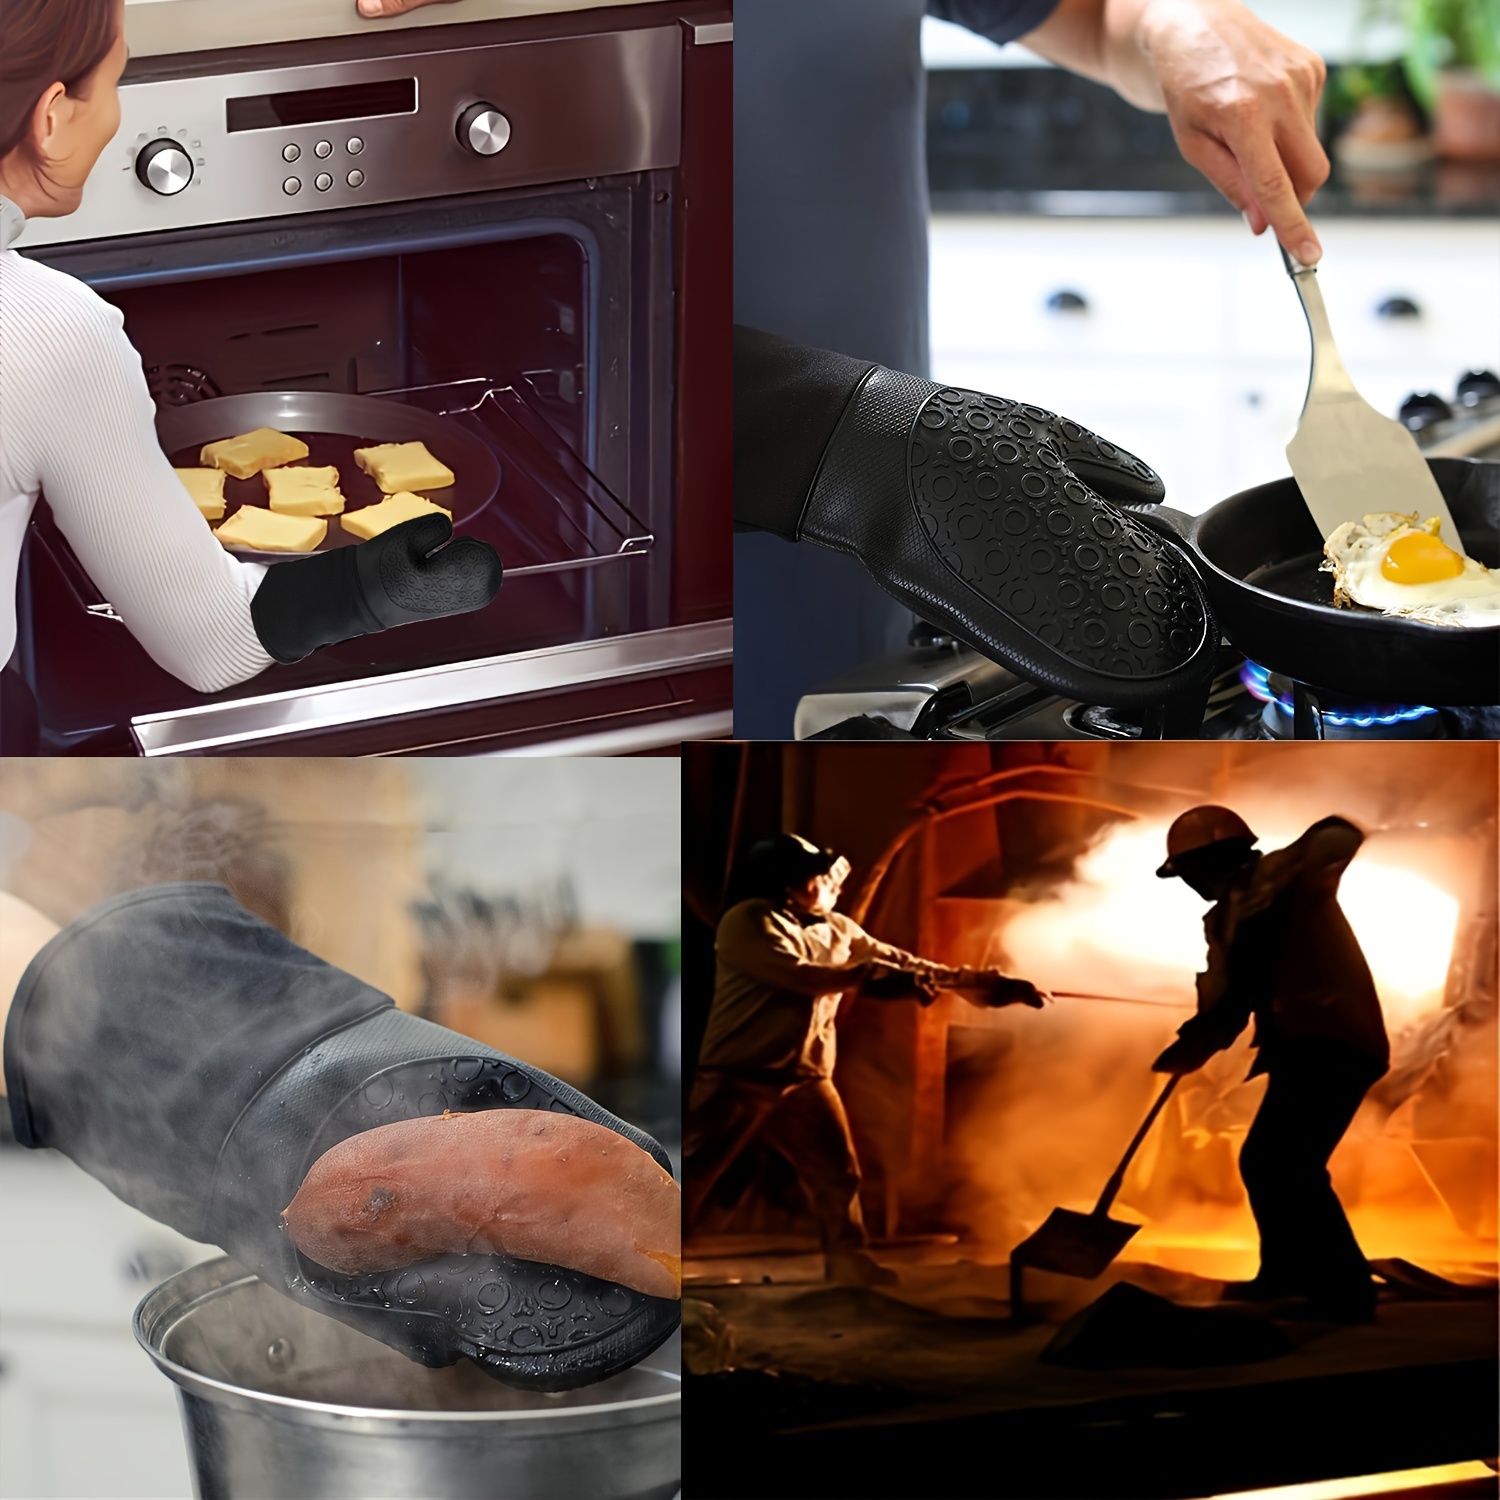  (1 Pair) Silicone Black Oven Mitts - Heat Resistant